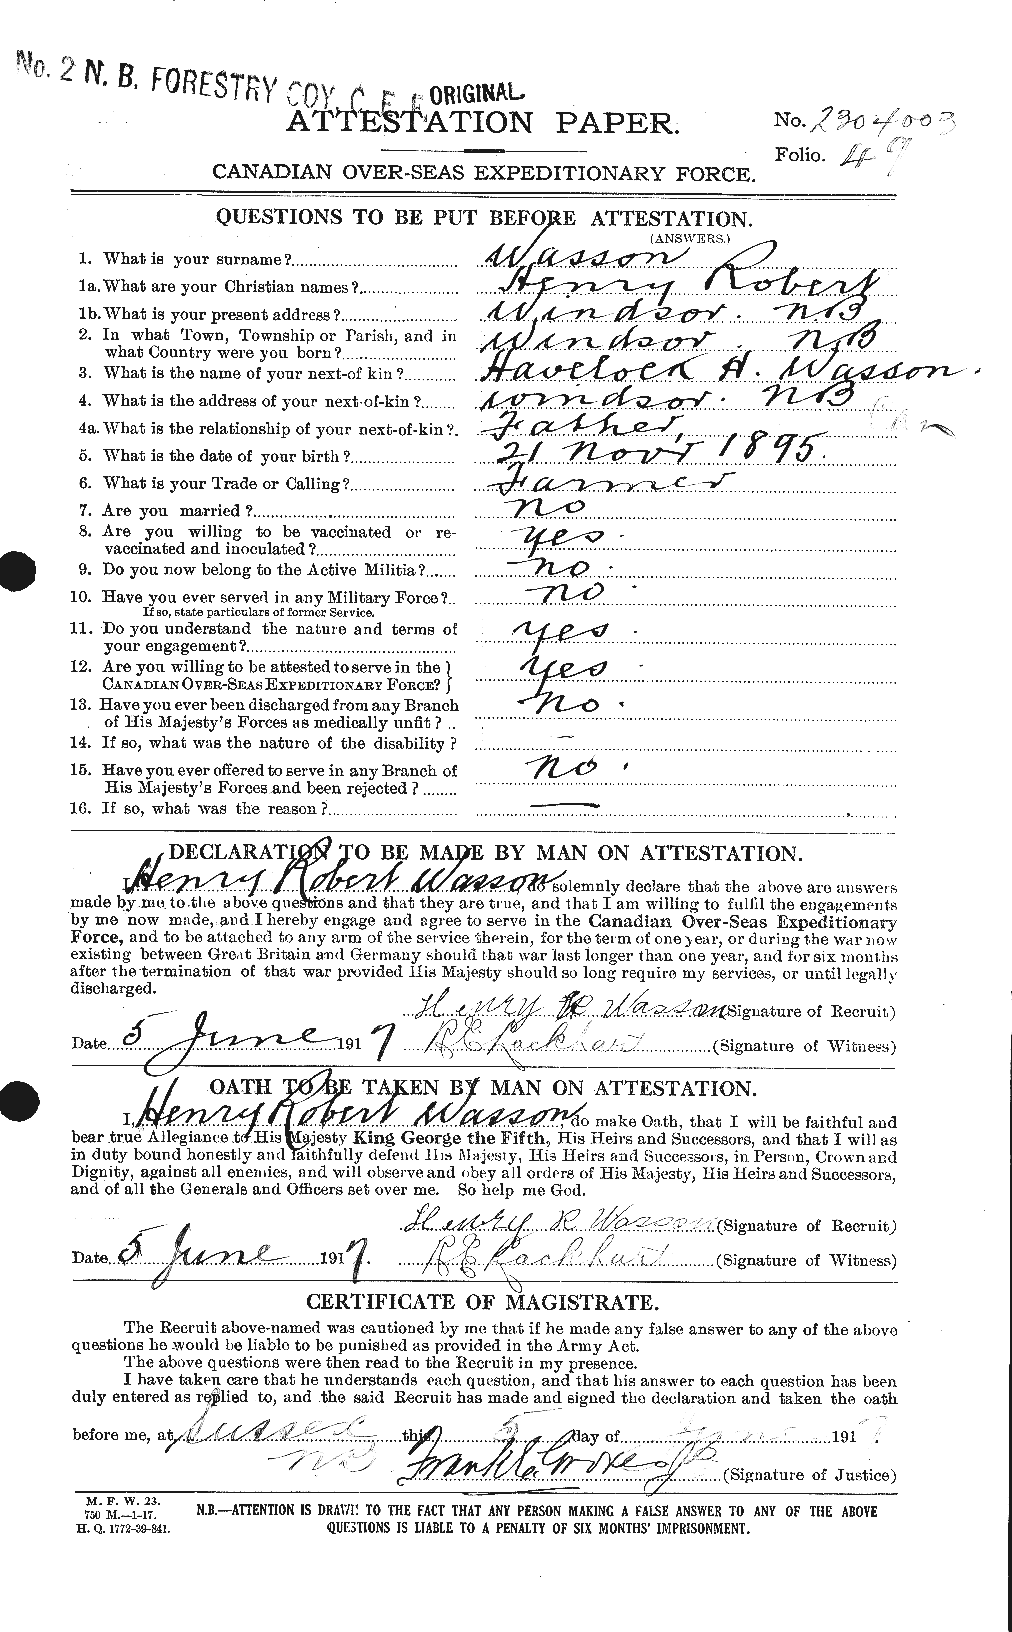 Personnel Records of the First World War - CEF 657958a